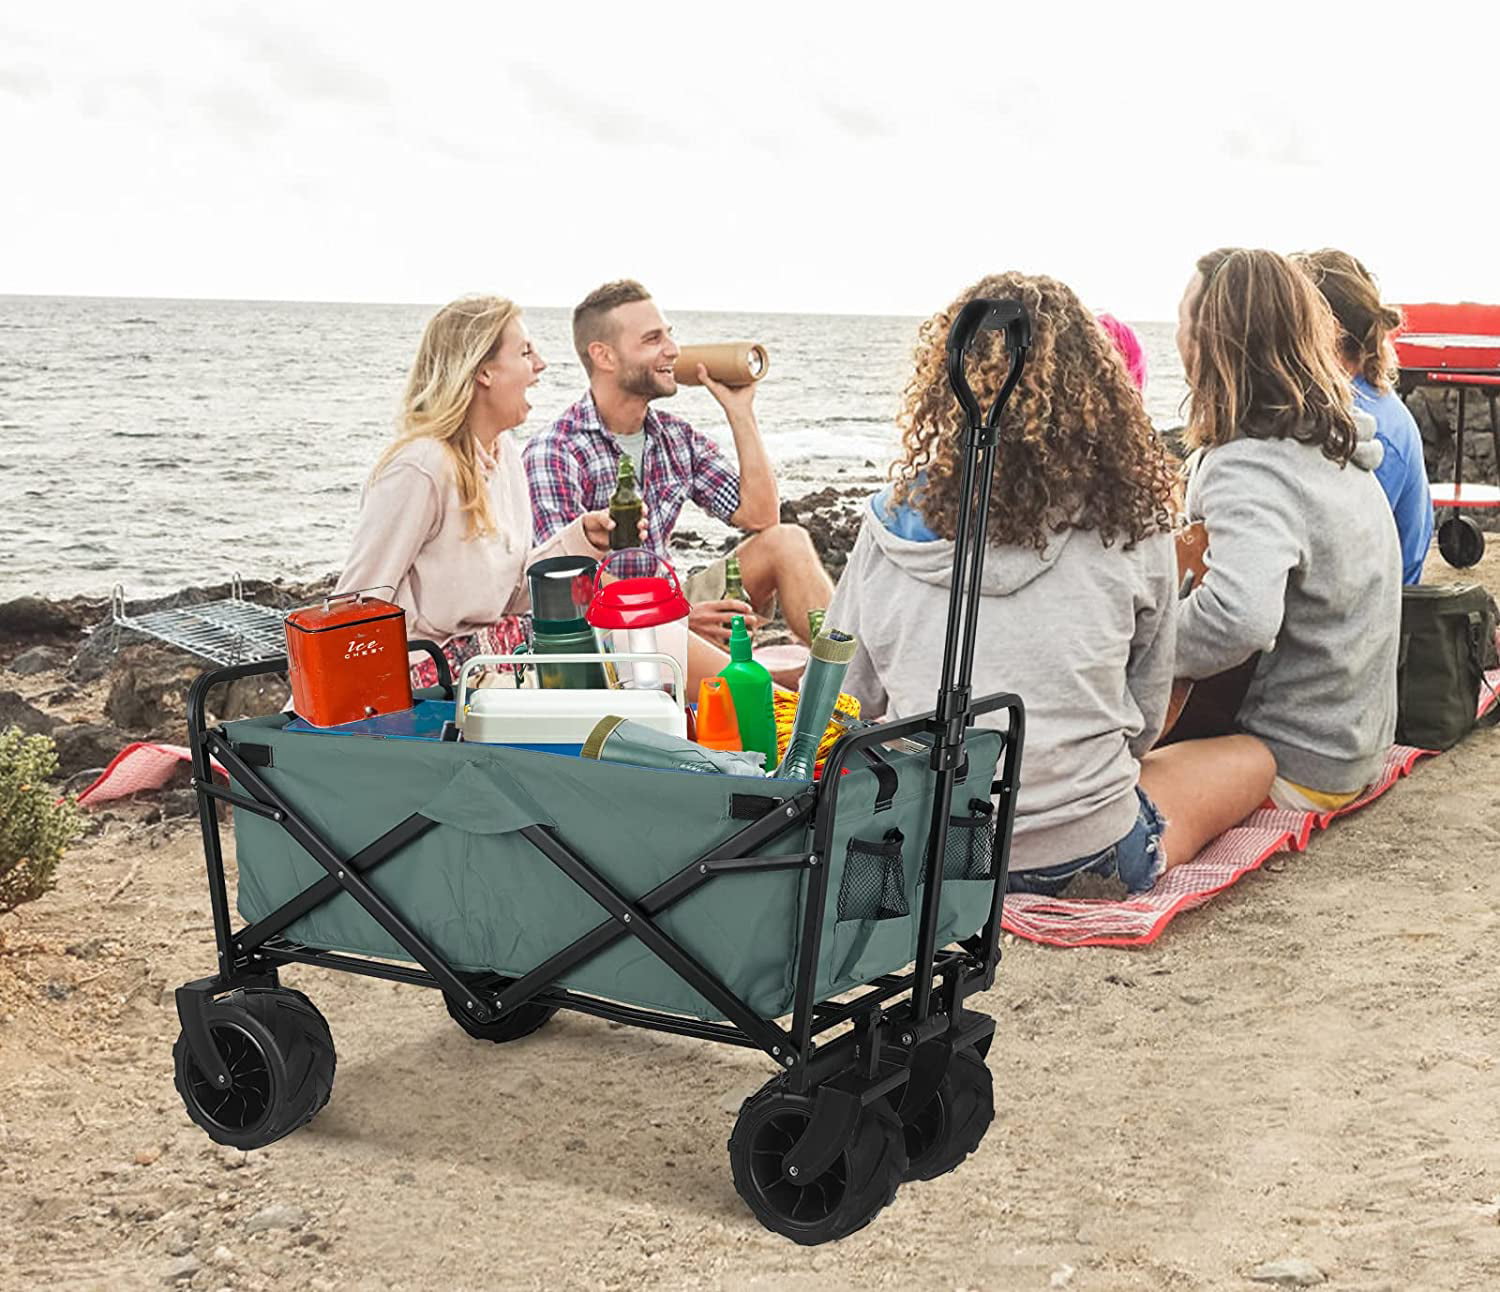 Red Carry Bag Sport Portable Collapsible Folding Heavy-Duty Utility Cart AthLike All-Terrain Beach Wagon 2 Cup Holder for Outdoor with 8'' Rubber Wheel Groceries 170LBS Max Load Garden 